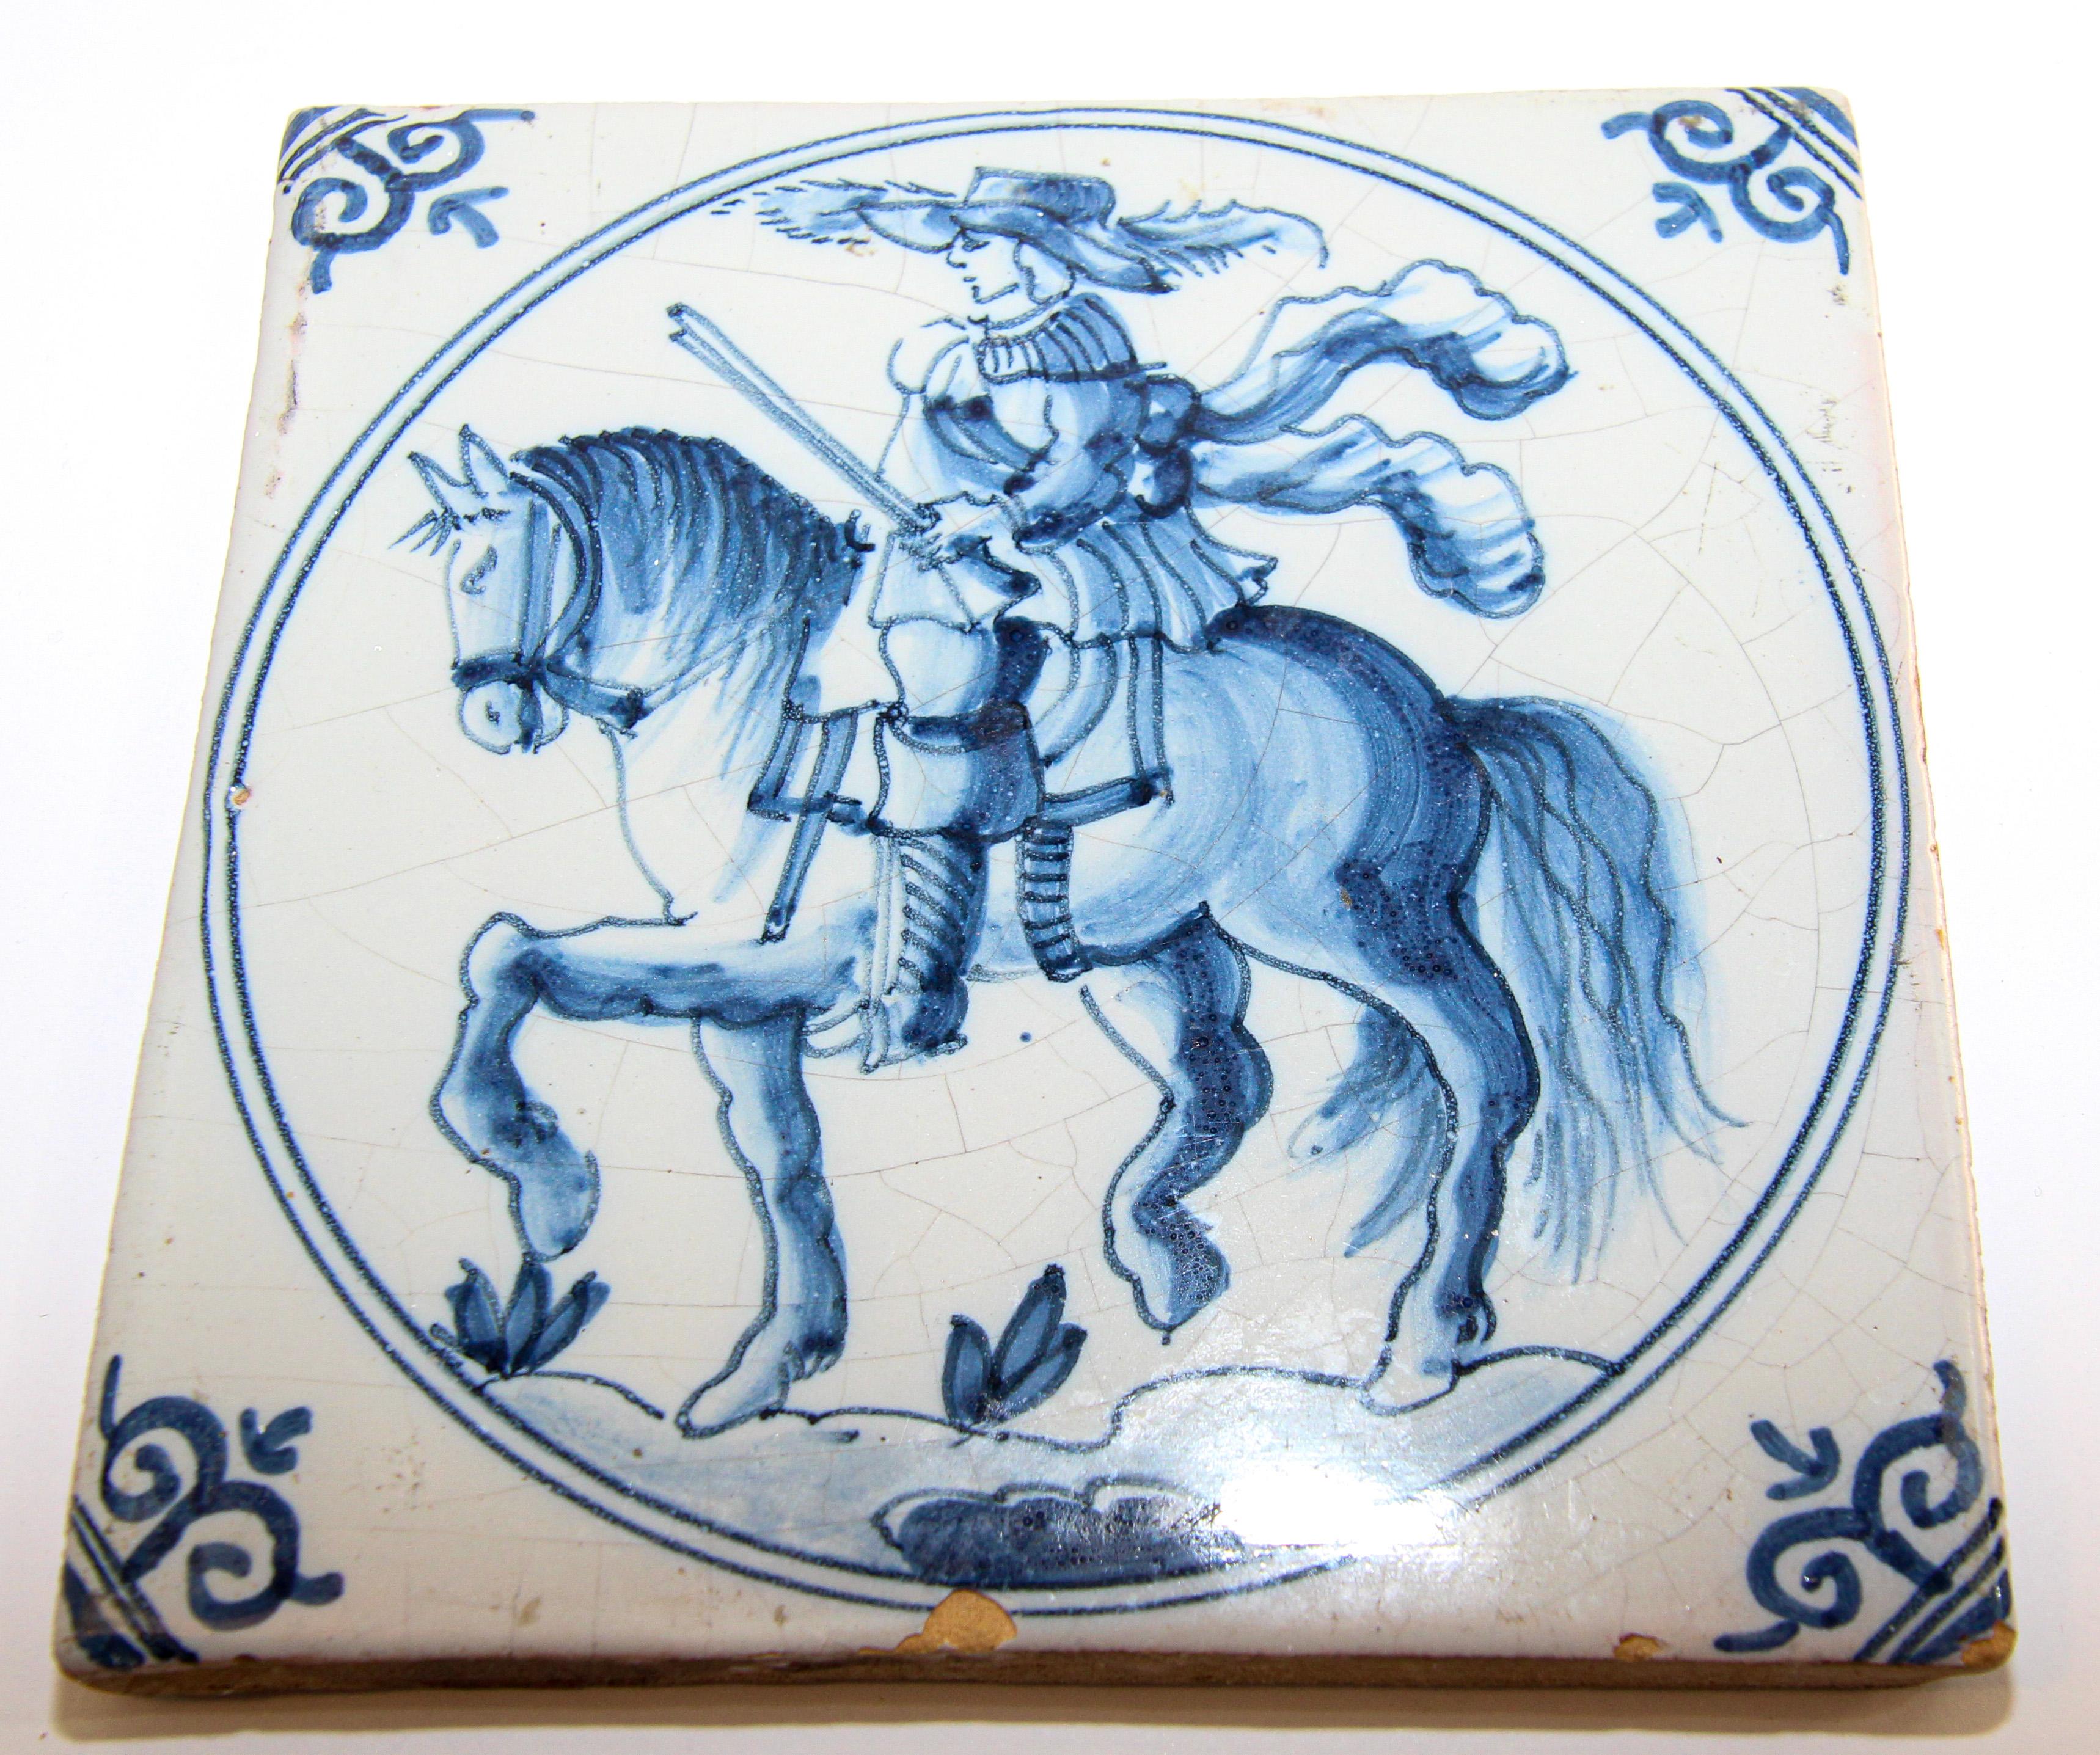 Delft Ceramic Decorative Tile Featuring a Man on Horse For Sale 1